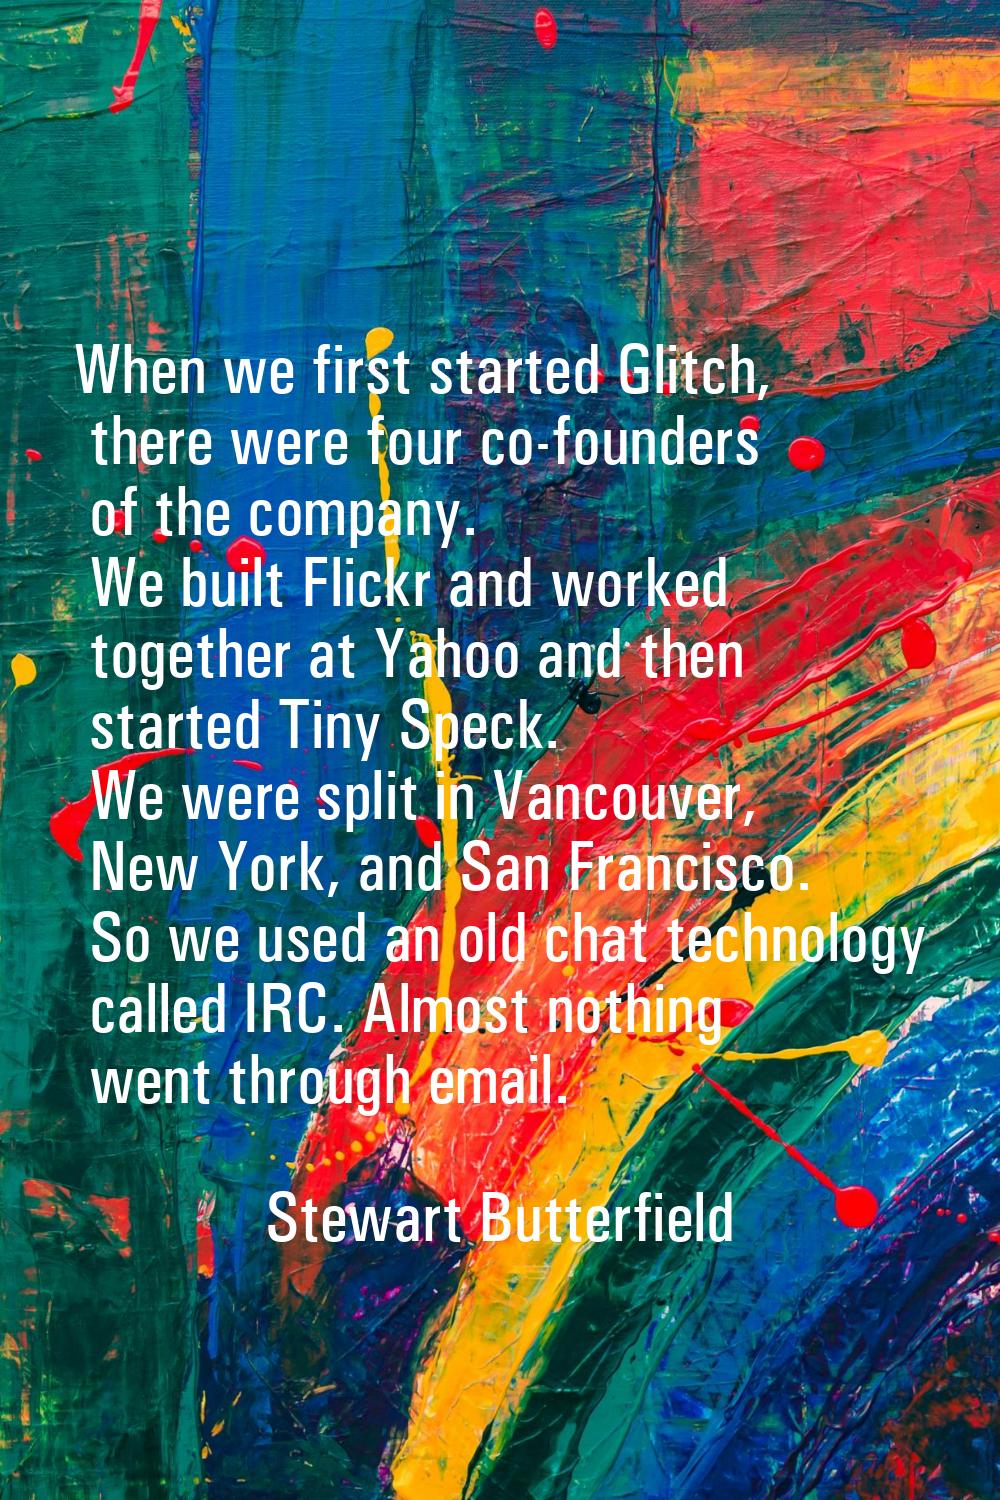 When we first started Glitch, there were four co-founders of the company. We built Flickr and worke